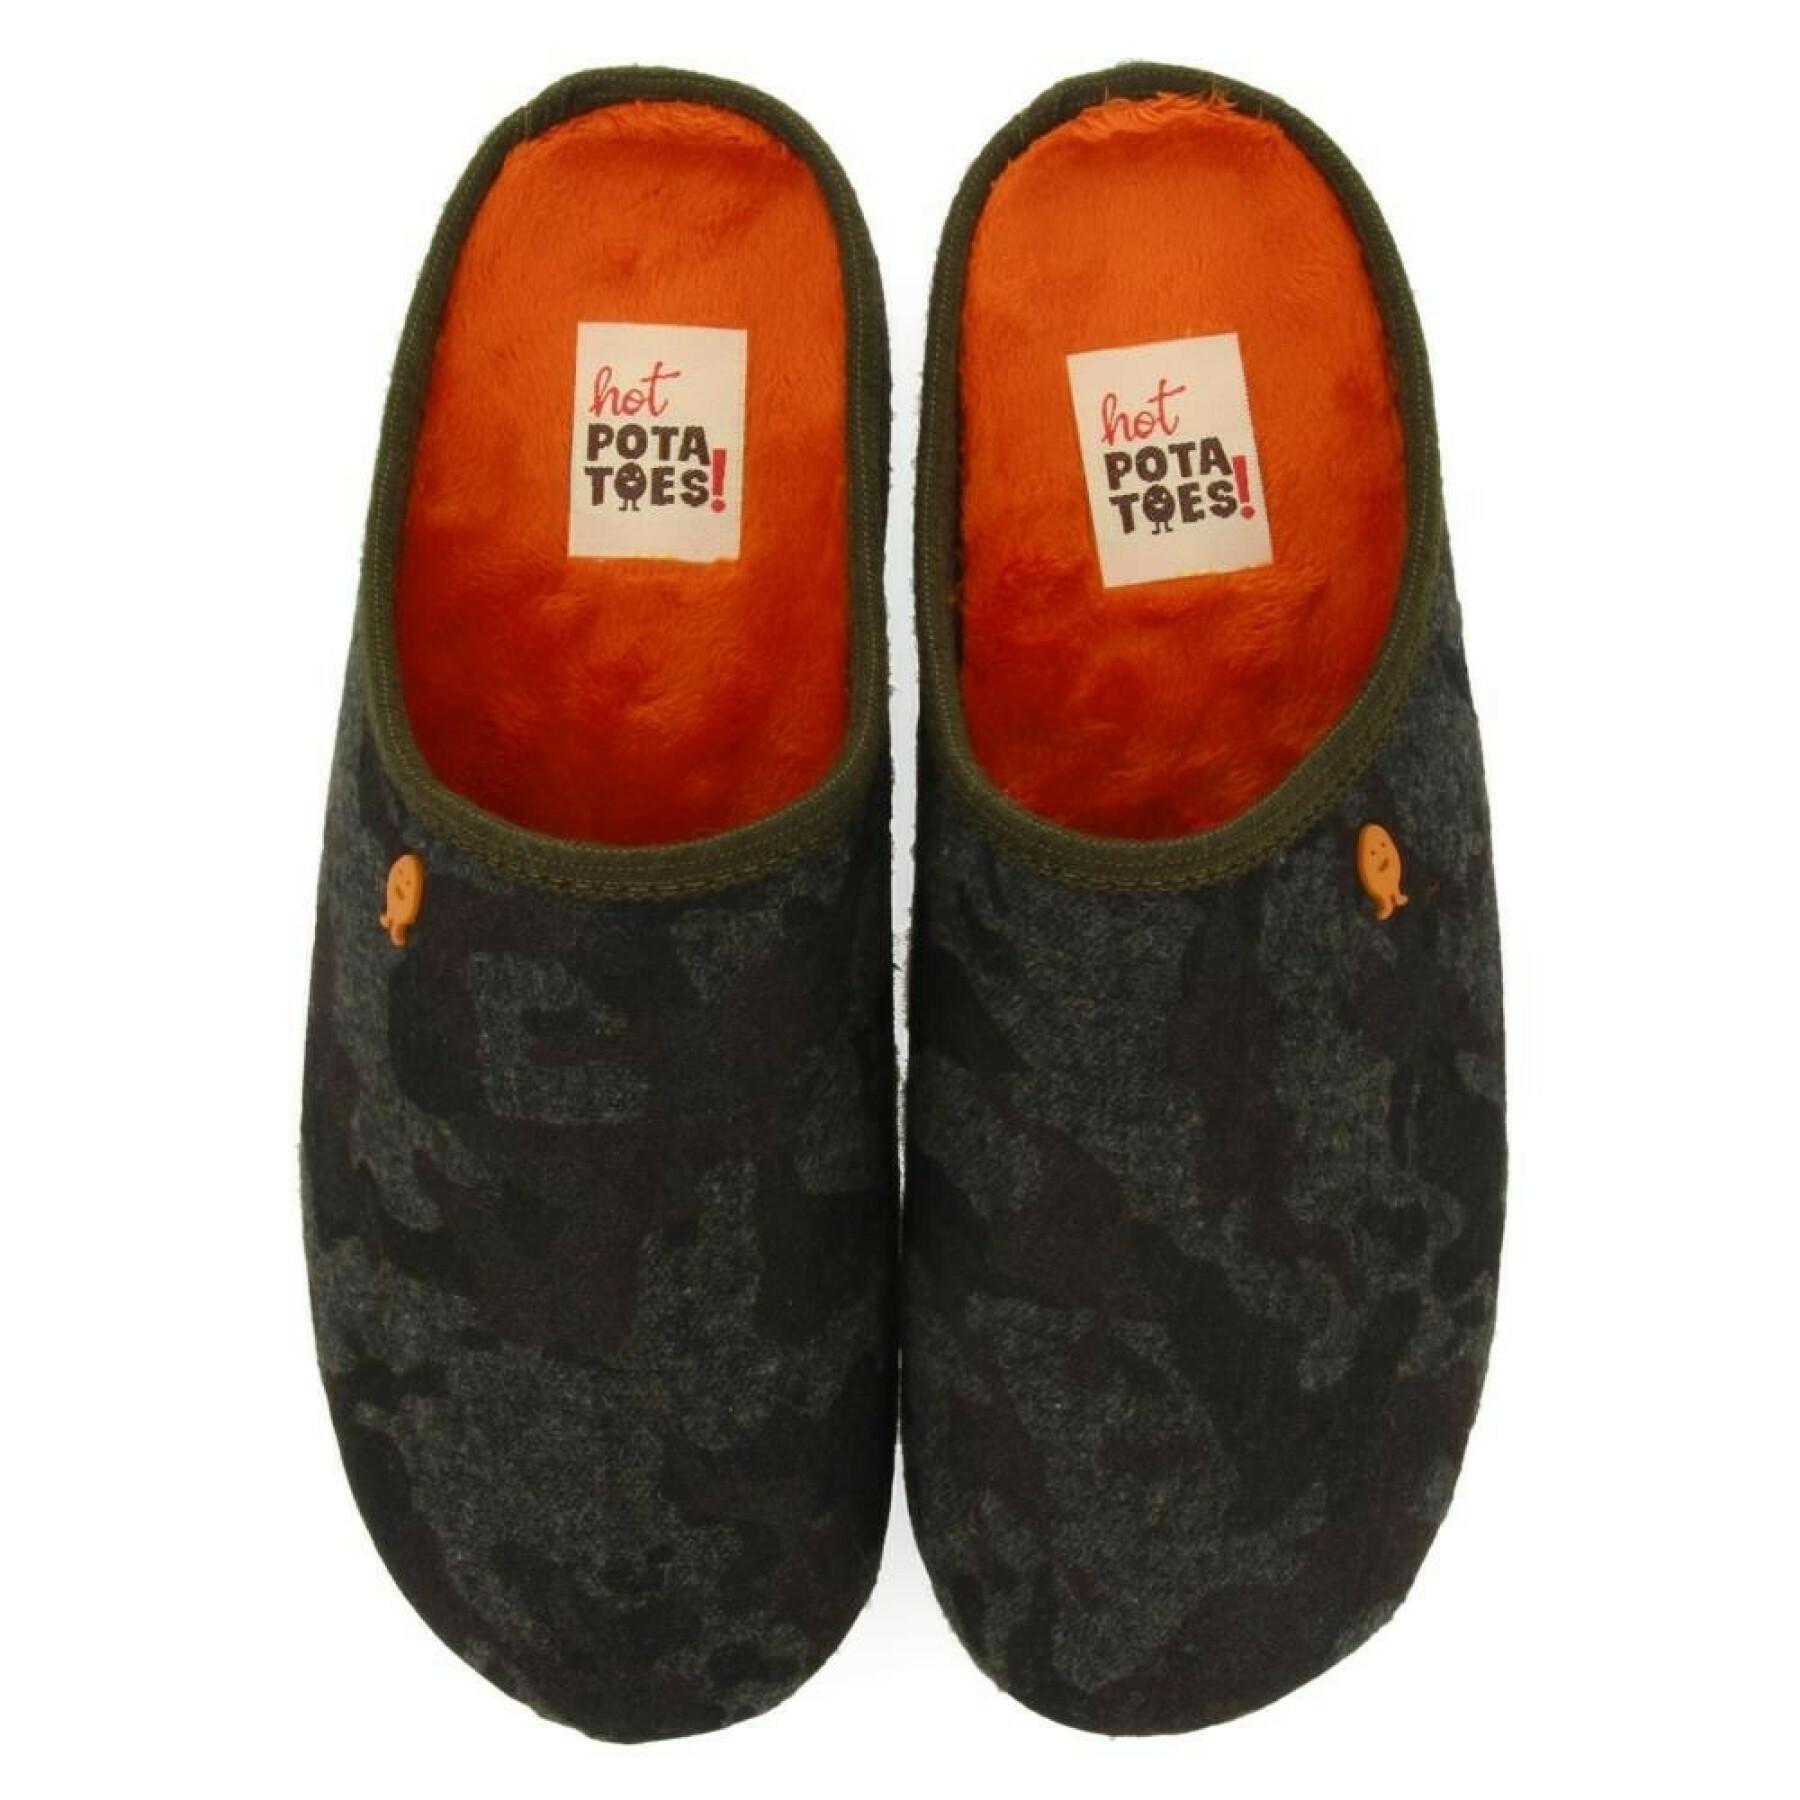 Slippers from the collection Hot Potatoes forchach